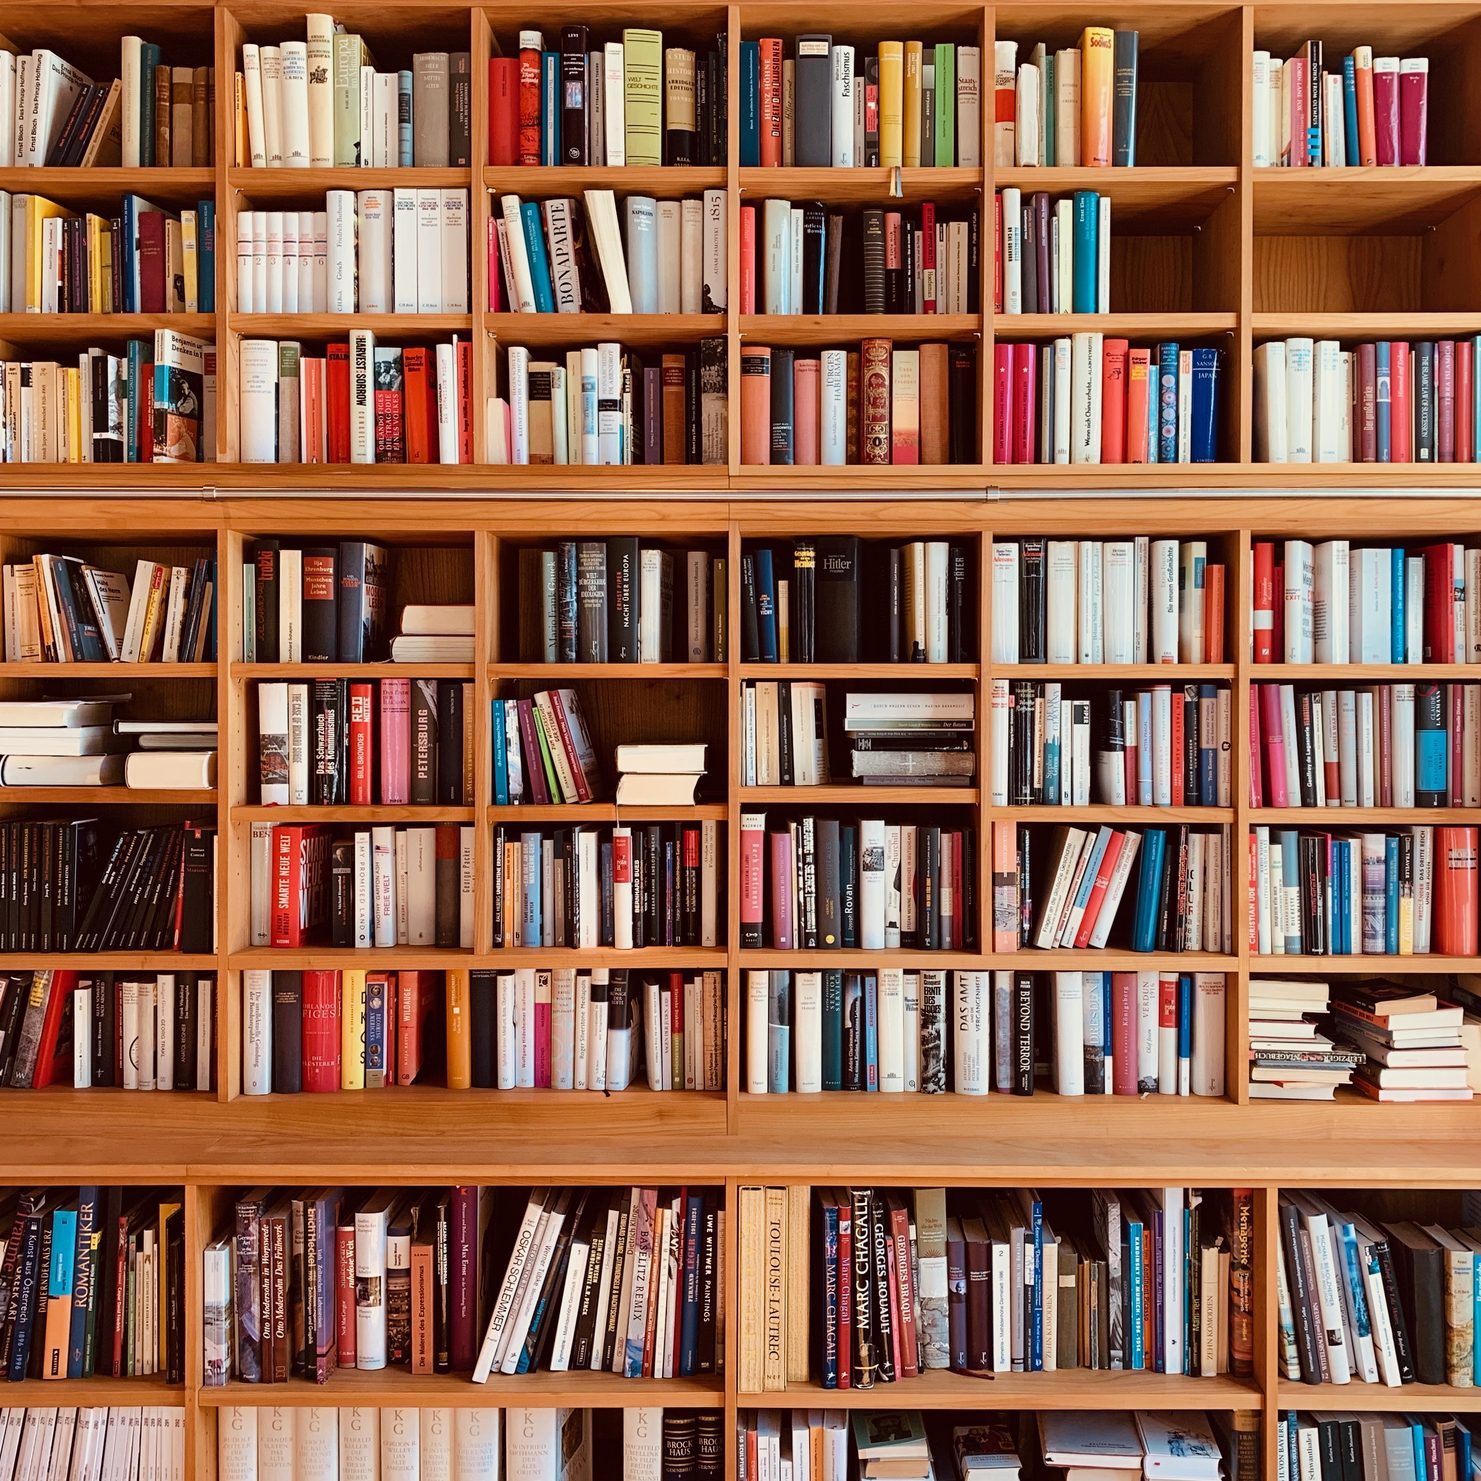 Organizing Books: How Authors and BookTokkers Arrange Their Shelves